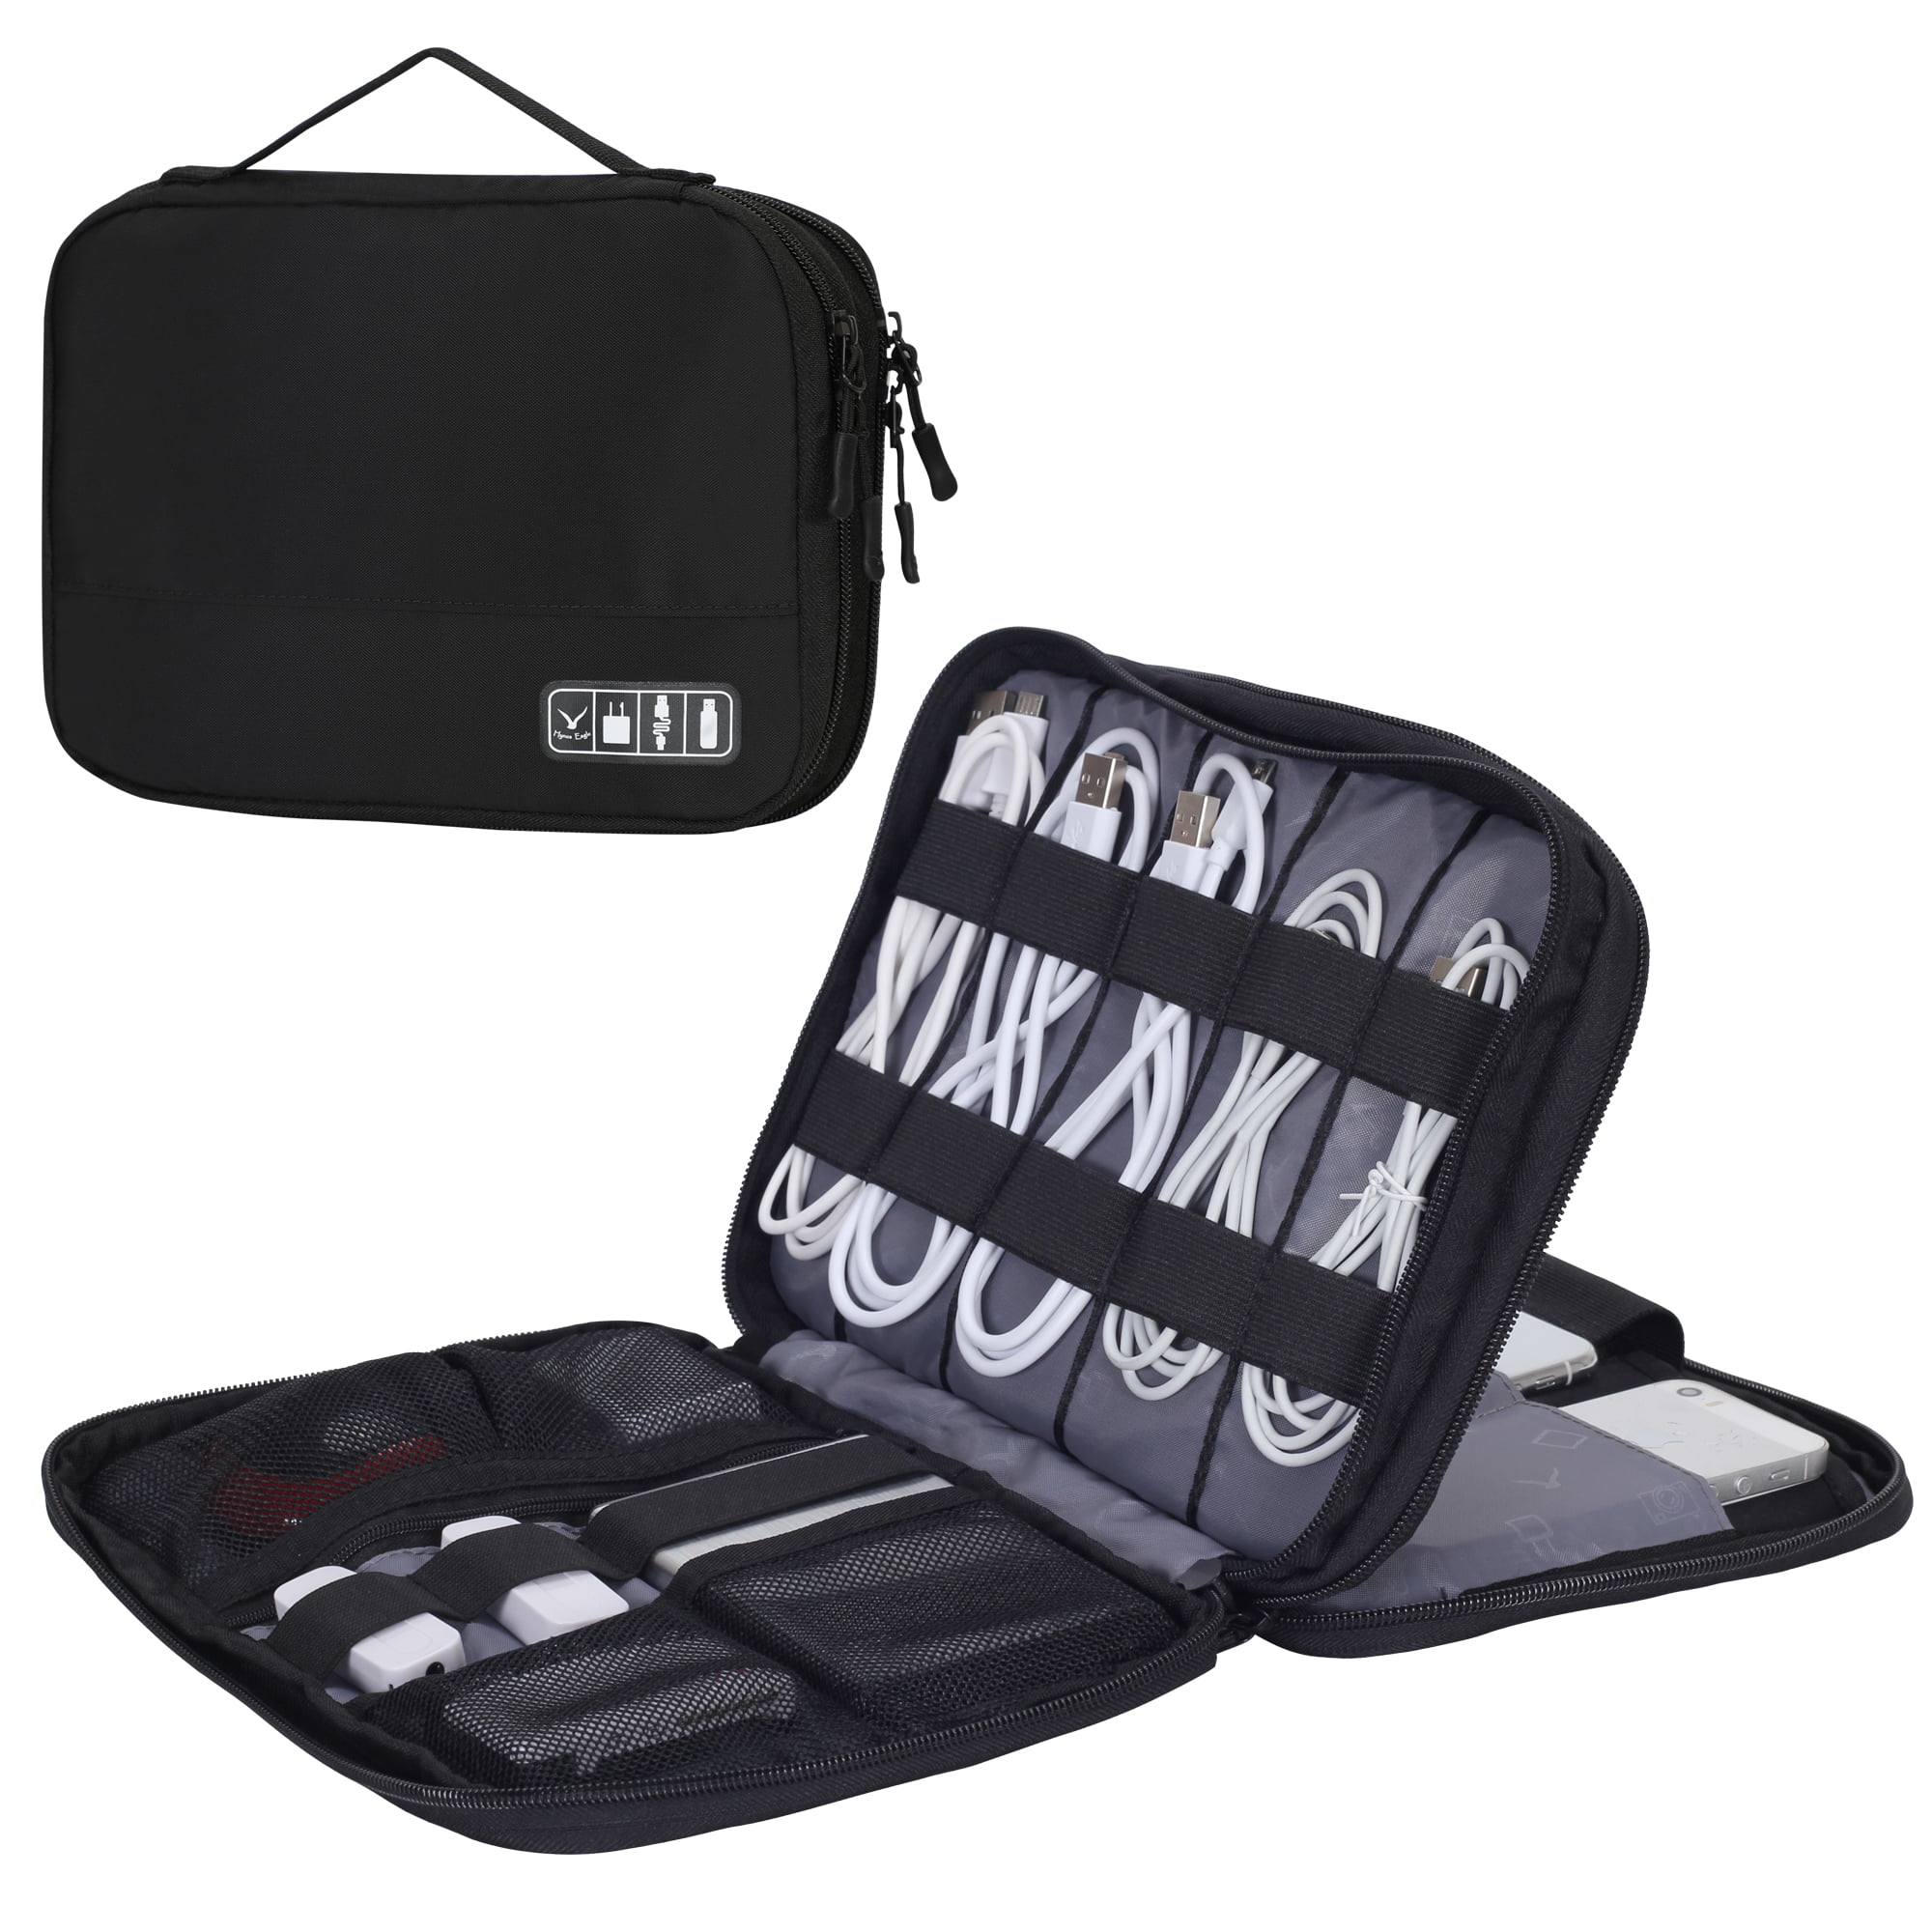 Double Layers Travel Cable Cord Organizer Electronics Accessories Case for Cords 